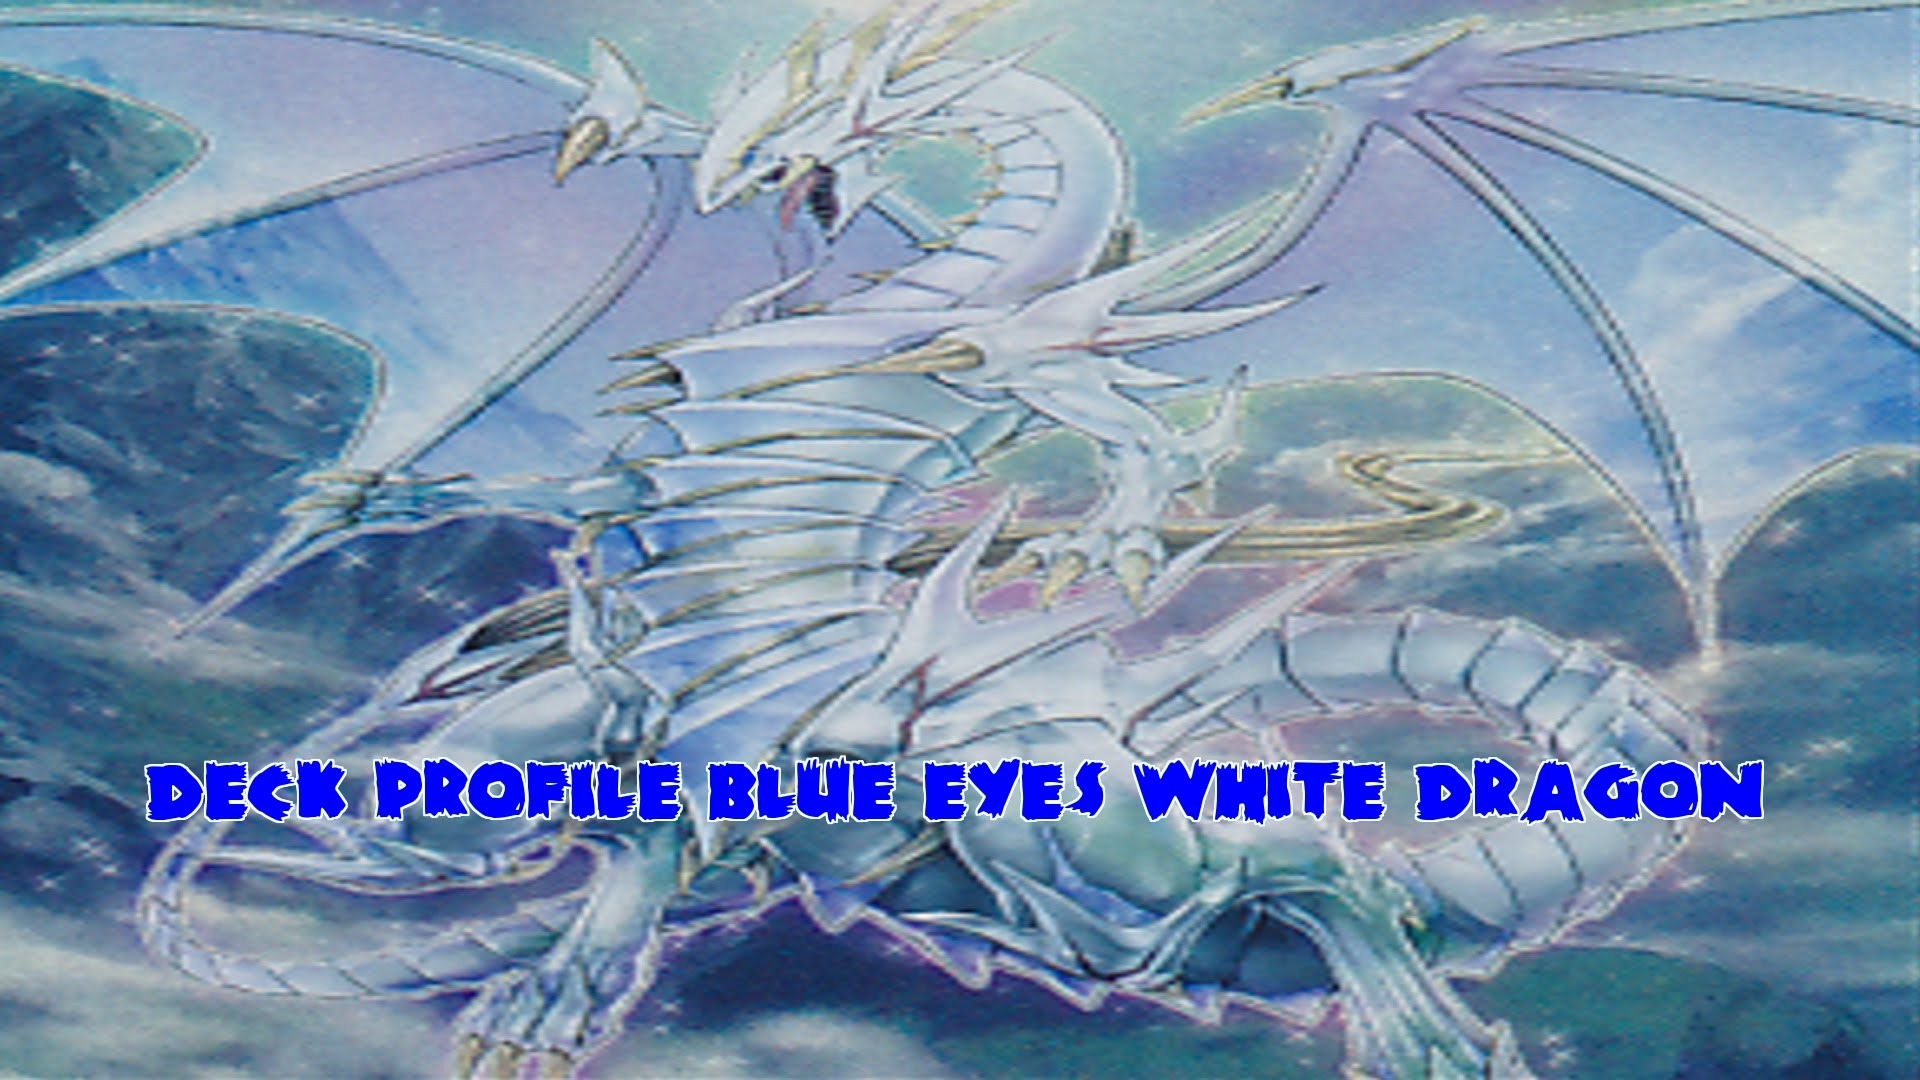 Yugioh Blue Eyes White Dragon Duels with Deck Profile February 2016 – YouTube